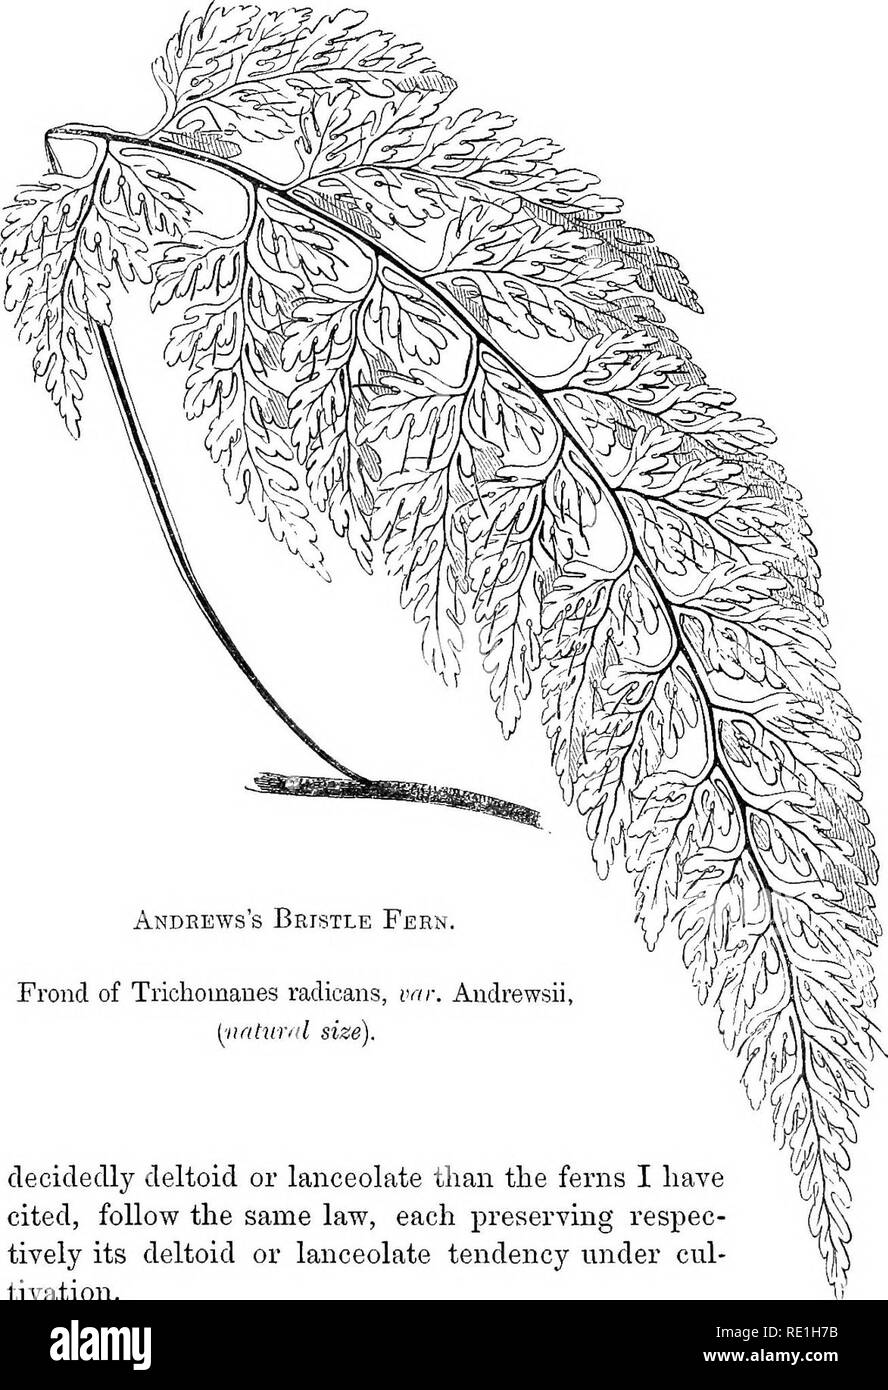 . A history of British ferns. Ferns. 292 BRISTLE PEEN. Halleri, and all the lanceolate Aspleniums, remains unaltered under any condition. Now the two Trichomanes, although less. Andbews's Bristle Fern. Frond of Trichomanes radicans, vnr. Audrewsii, {^natural size). decidedly deltoid or lanceolate than the ferns I have ky cited, follow the same law, each preserving respec- tively its deltoid or lanceolate tendency under cul- tivation. Again, there is a decided difference, as far as I can learn from my limited materials, in the involucres of the two plants. In. Please note that these images ar Stock Photo